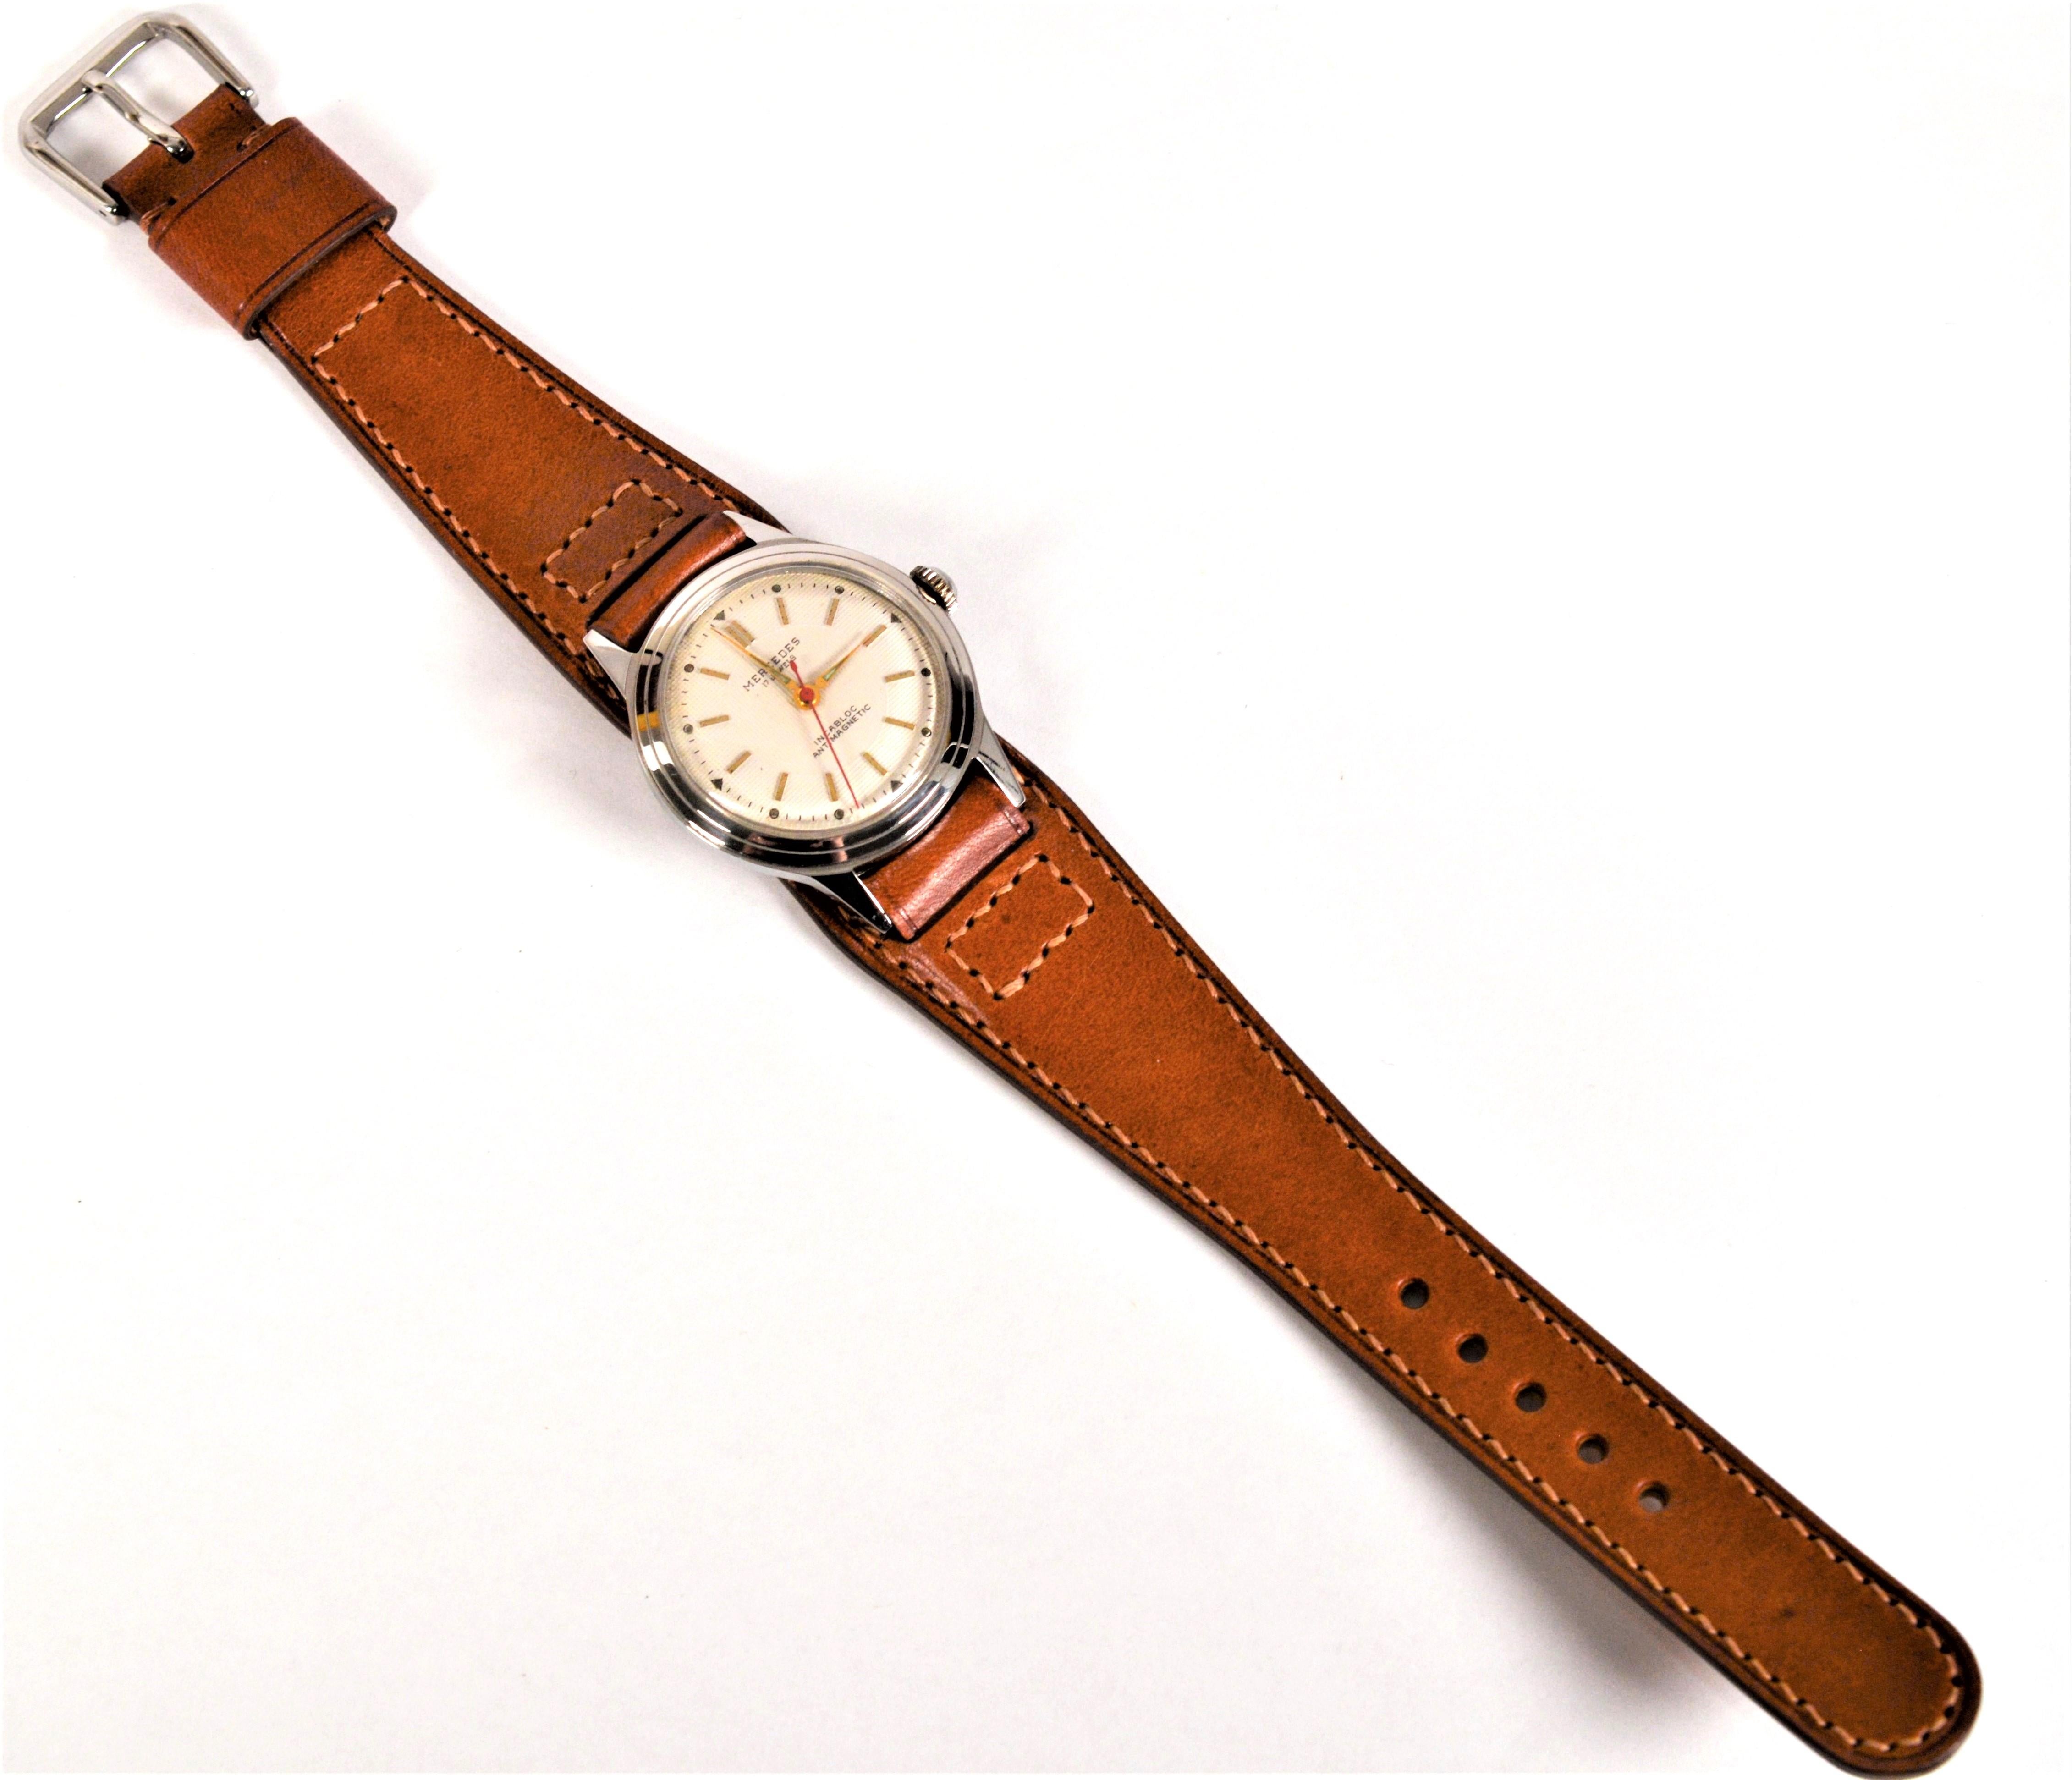 Mercedes Stainless Steel Post WWII Vintage Wrist Watch In Good Condition For Sale In Mount Kisco, NY